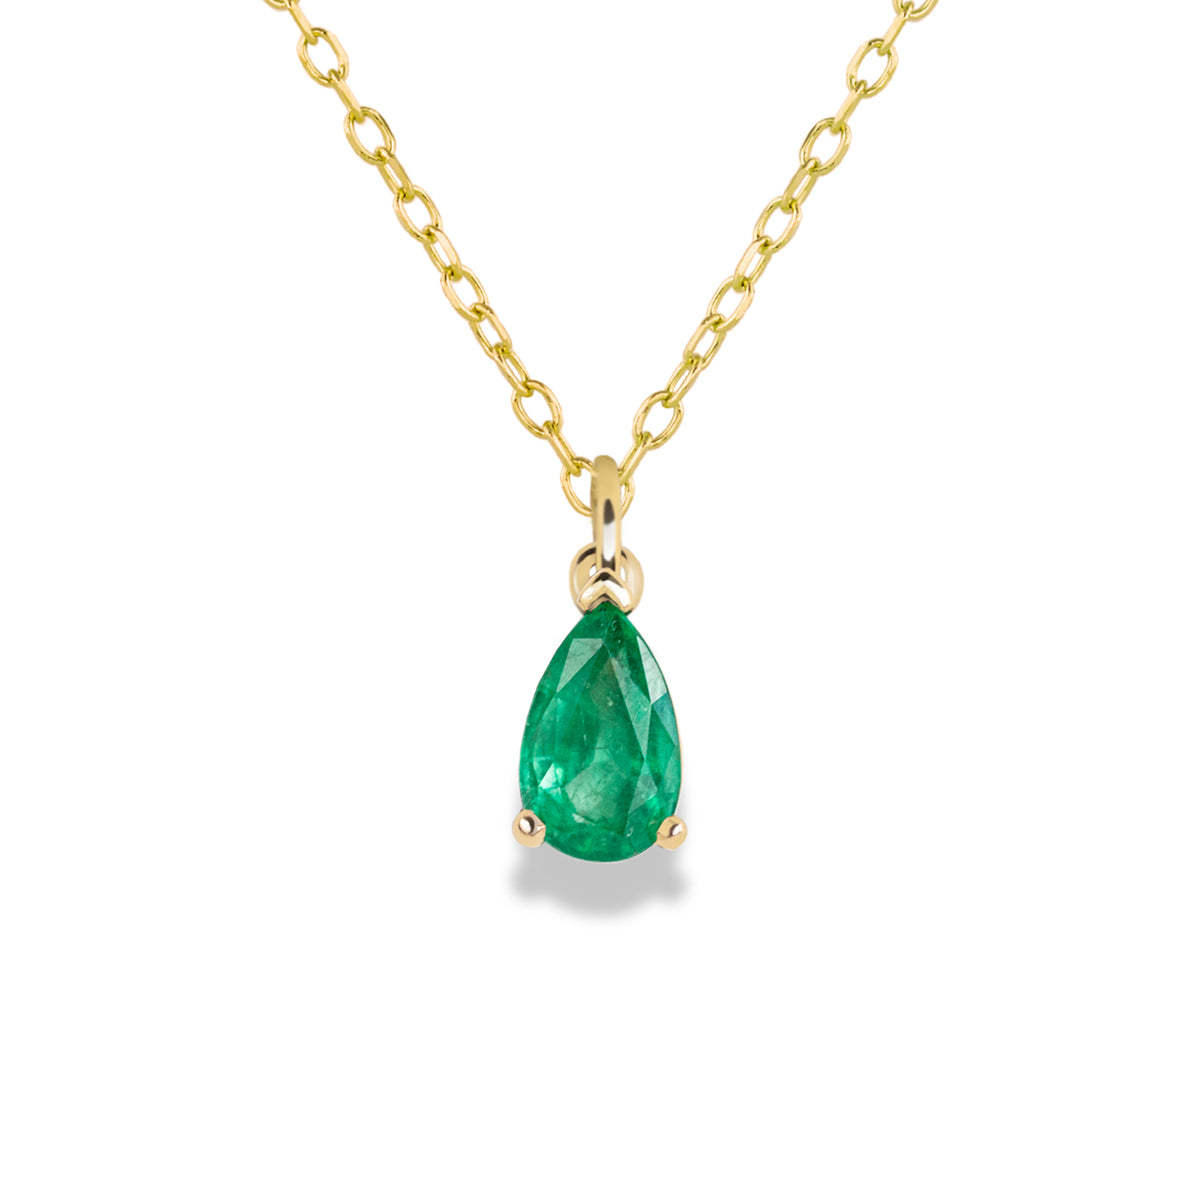 Jamie Park Jewelry - Pear Cut Emerald Necklace Our new Pear Cut Emerald Necklace is the perfect gift for birthdays, Mother&#39;s Day, and anniversaries. The stunning green hue of the pear-cut emerald radiates elegance and sophistication. This simple yet stylish necklace is great for the office, night outs, or any occasion.